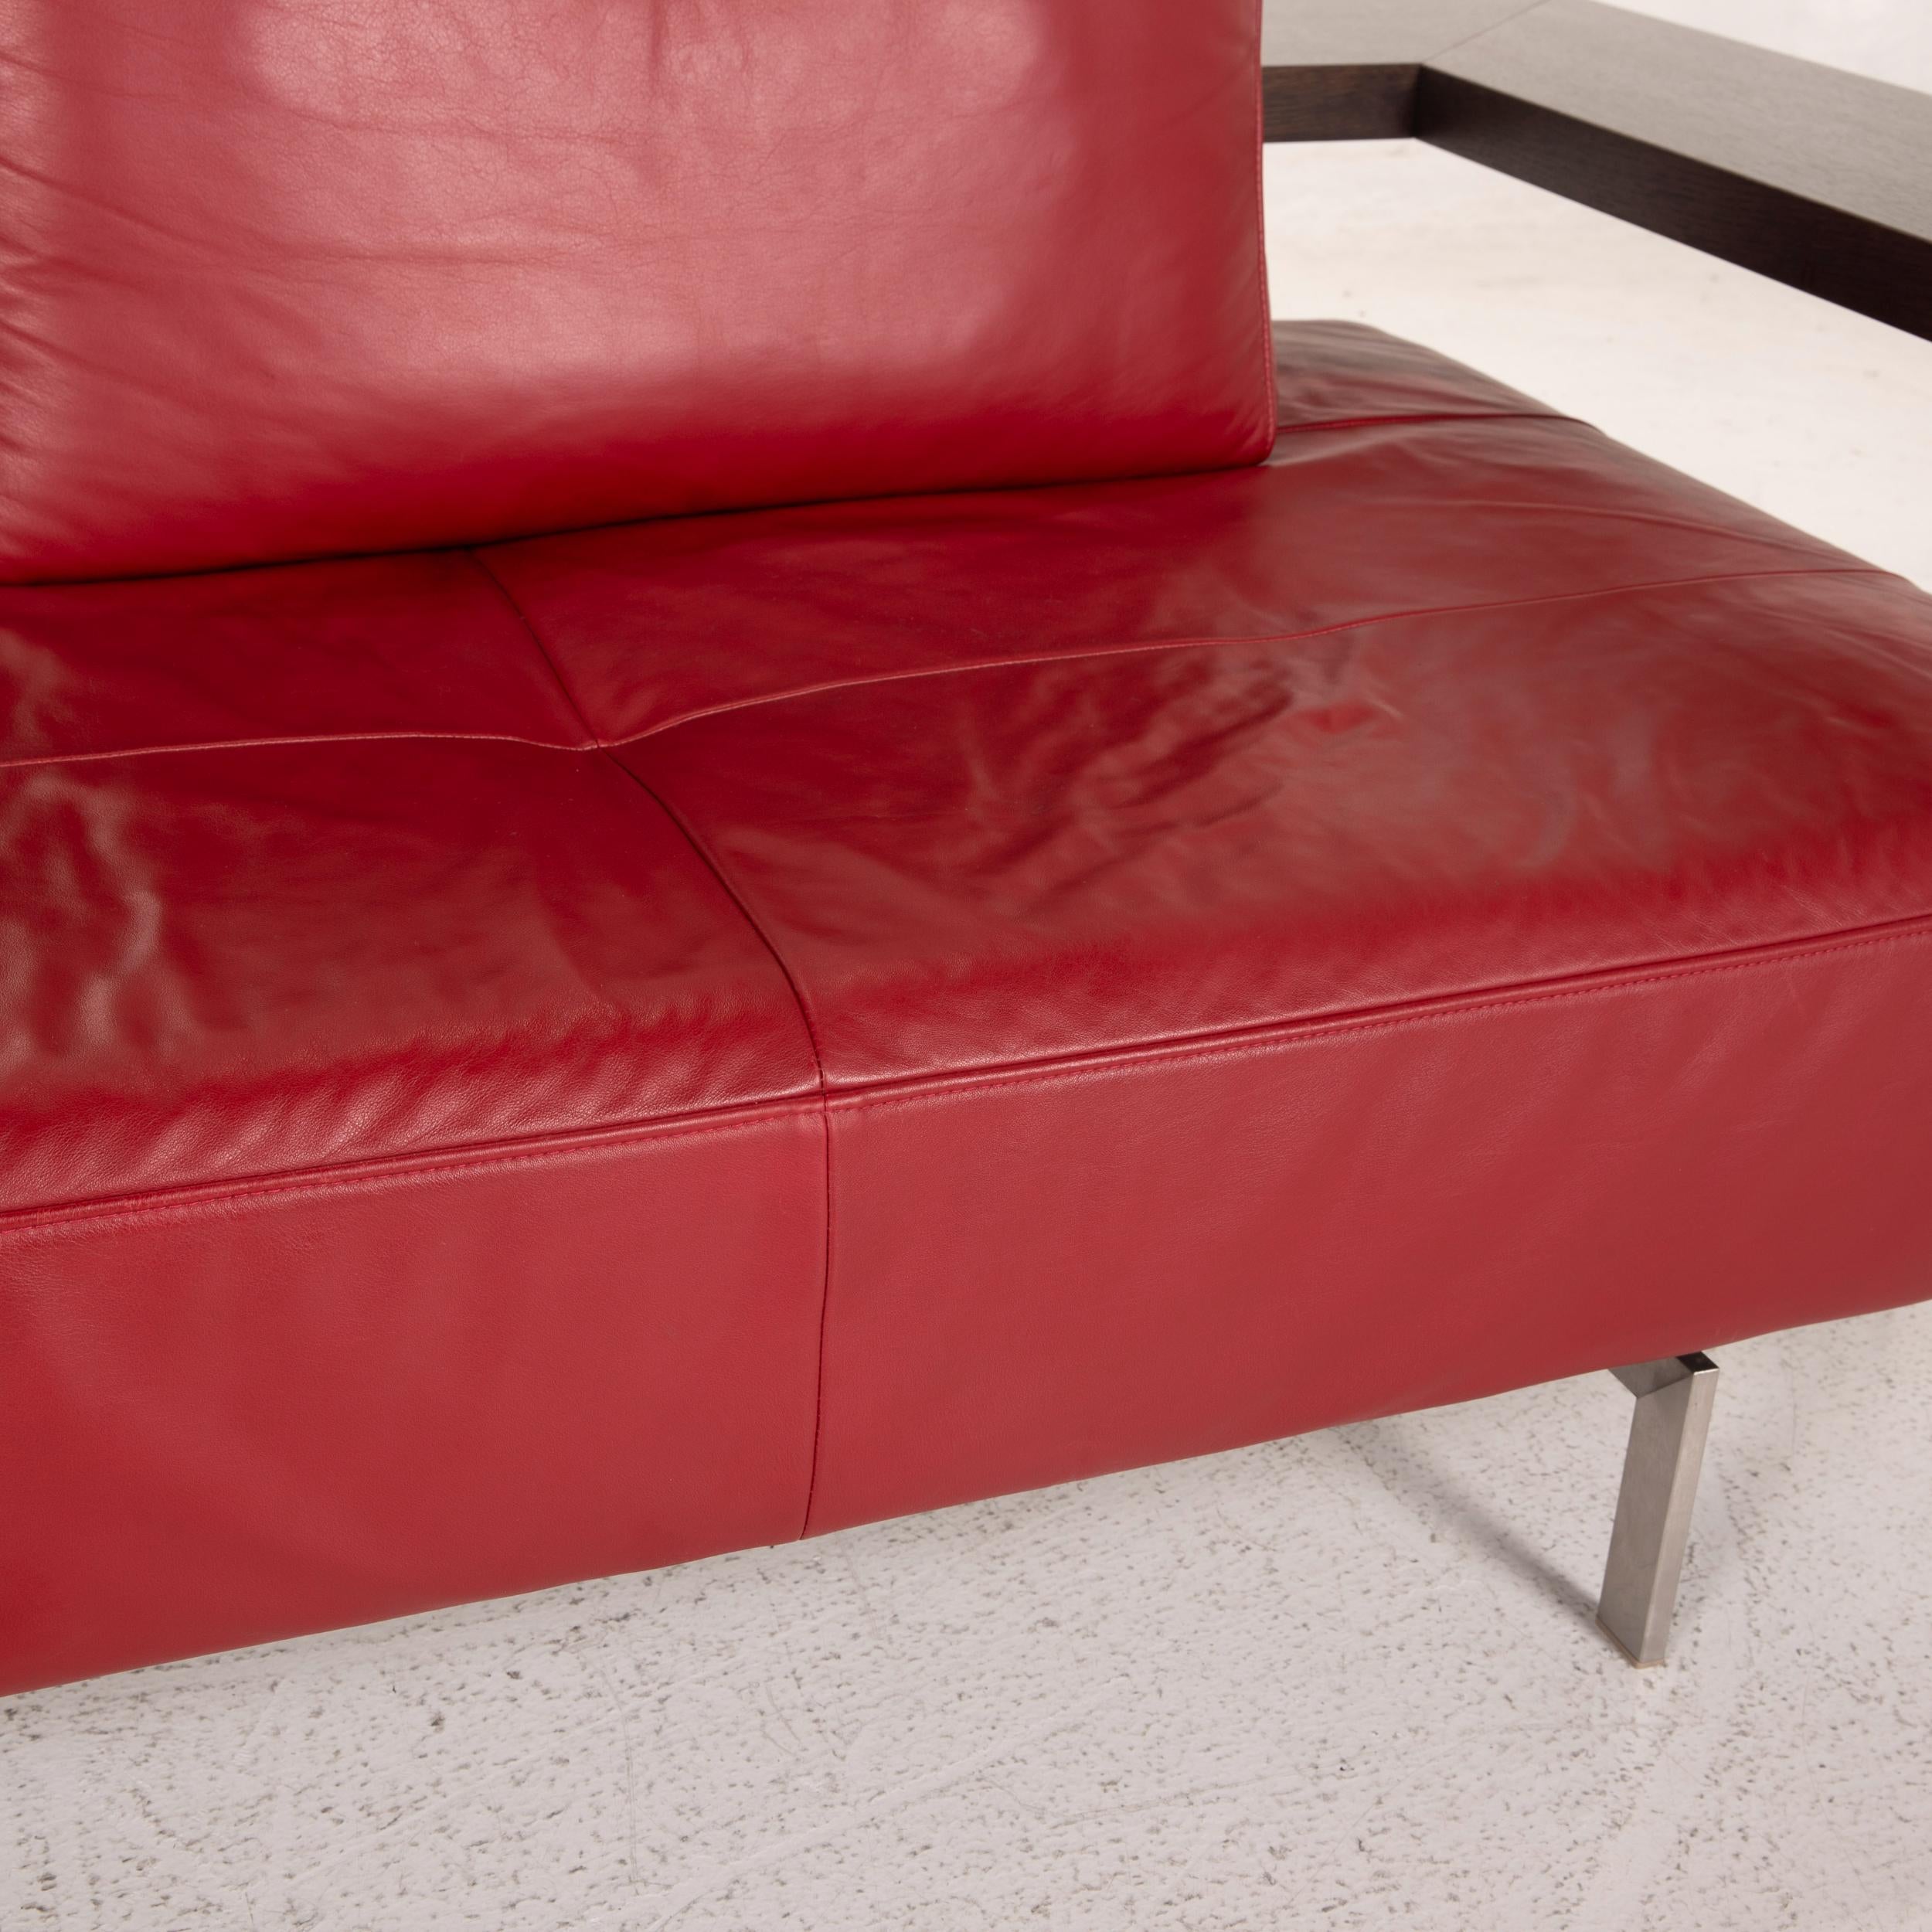 German Rolf Benz Dono leather sofa red two-seater couch